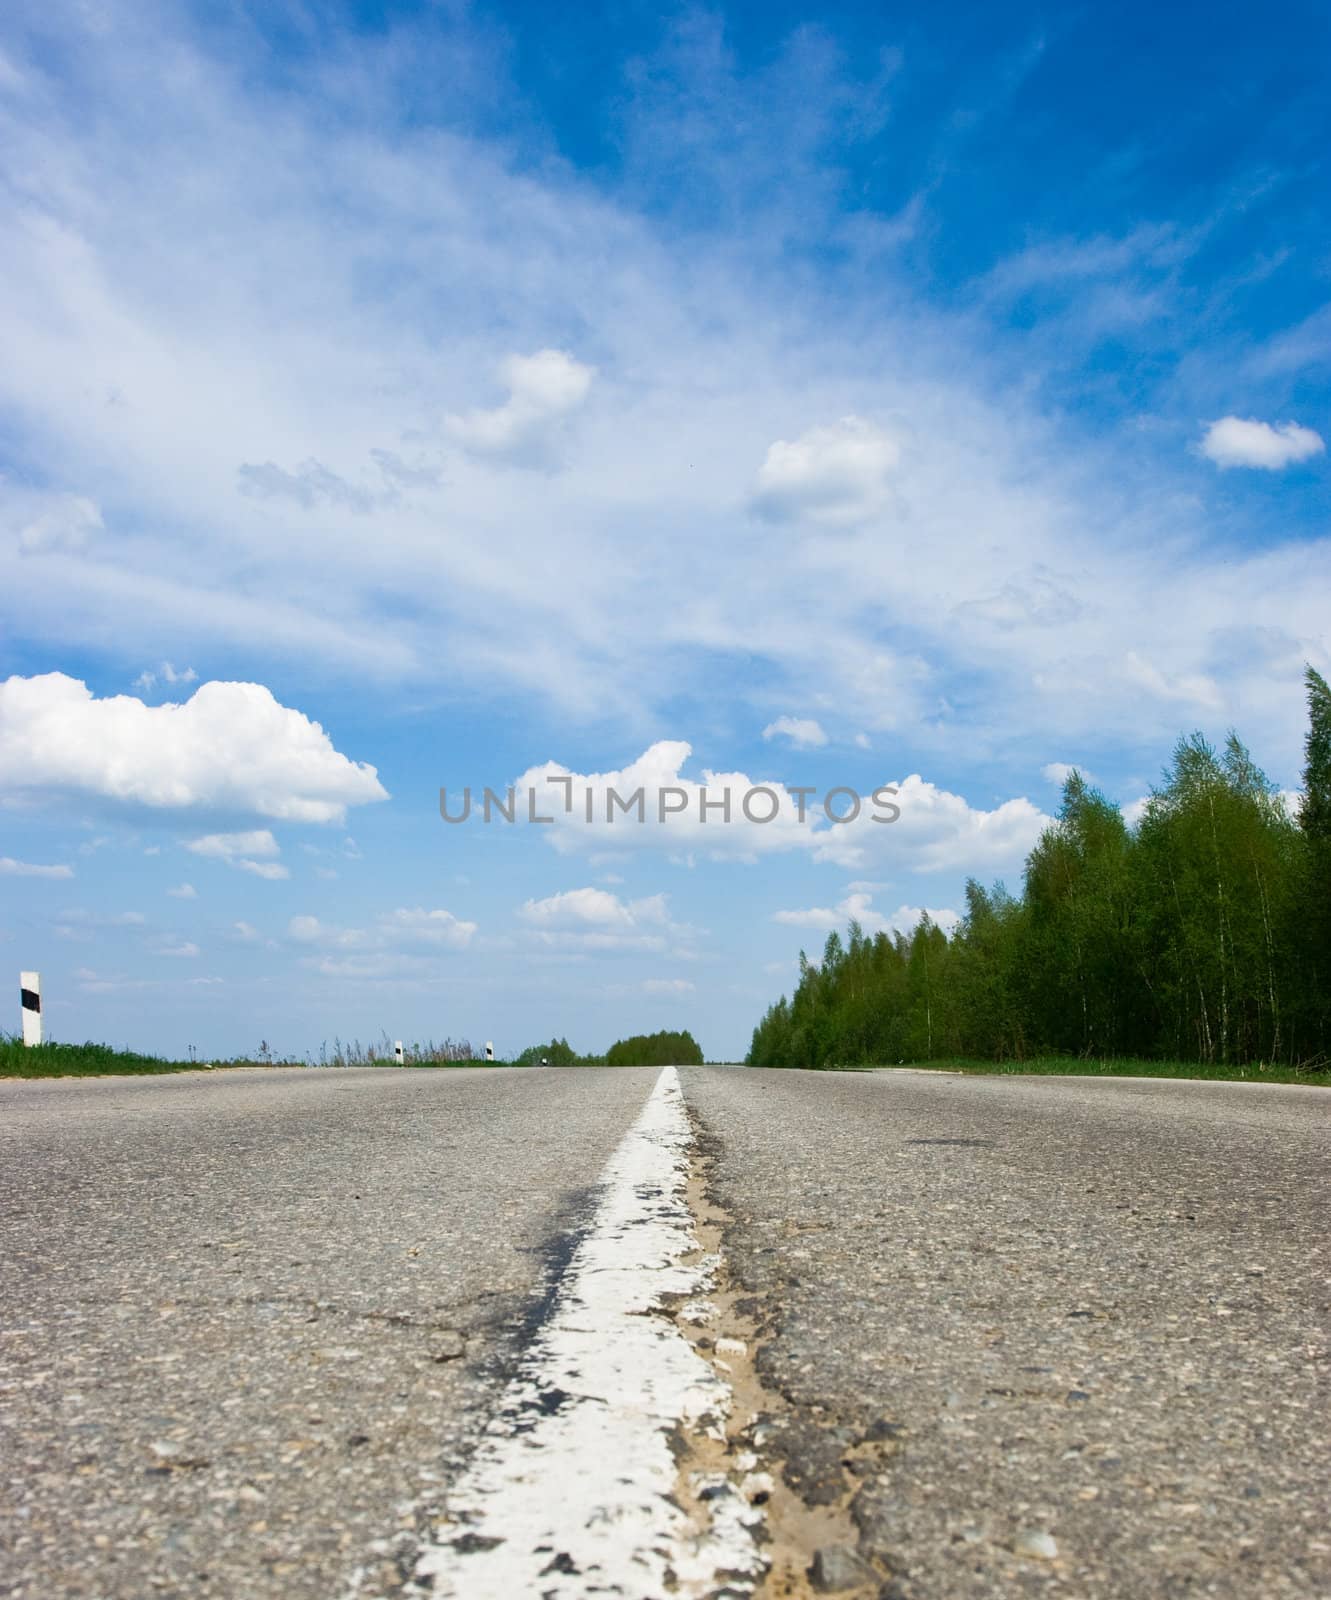 Open road against blue sky with clouds